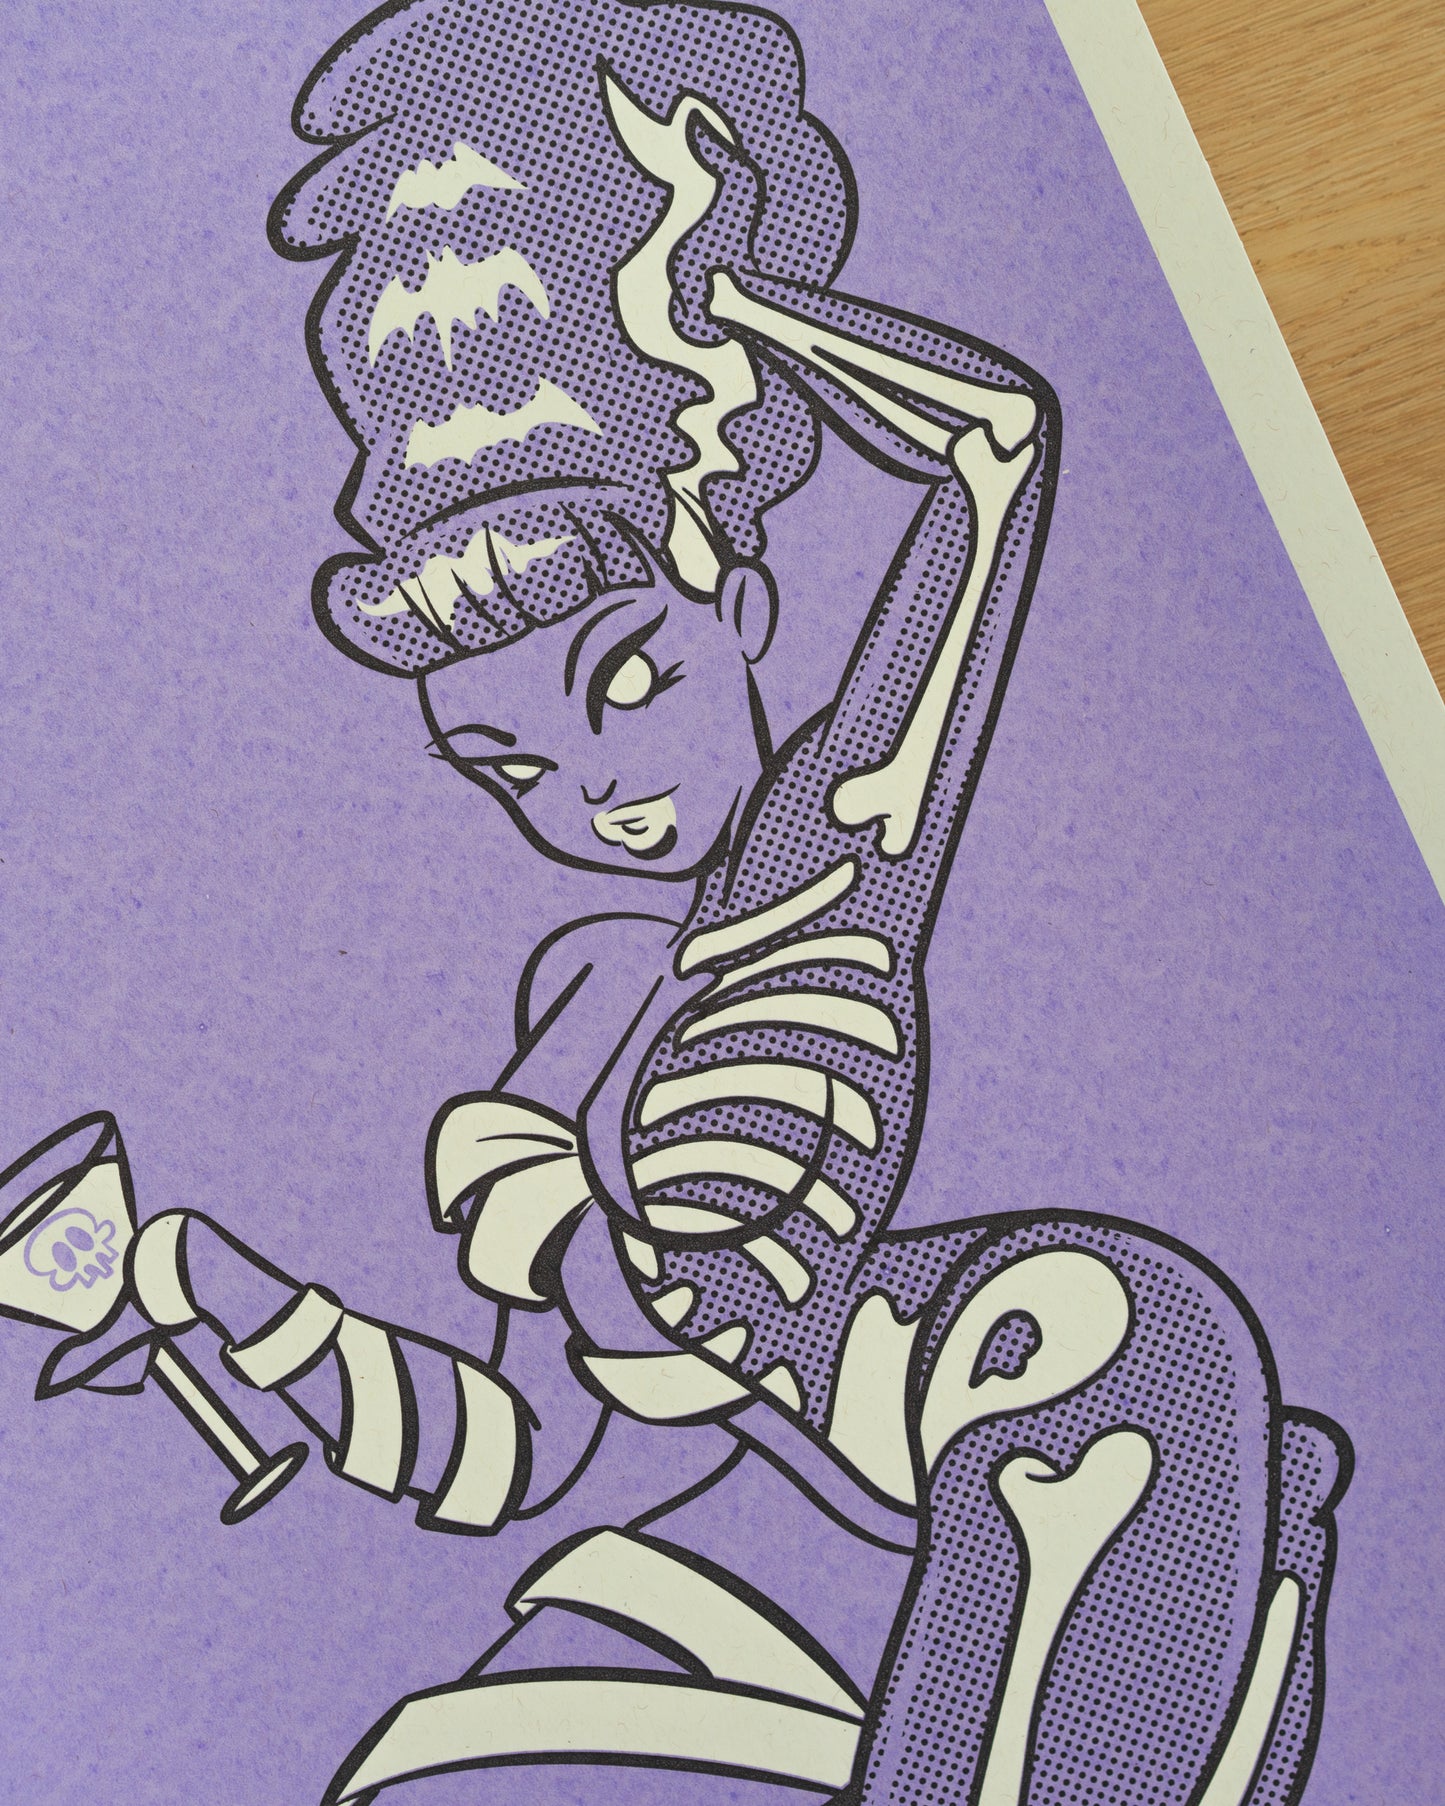 BRIDE BONES© GHOULISH PURPLE SCREEN PRINTED POSTER 12.5 x 19 inches